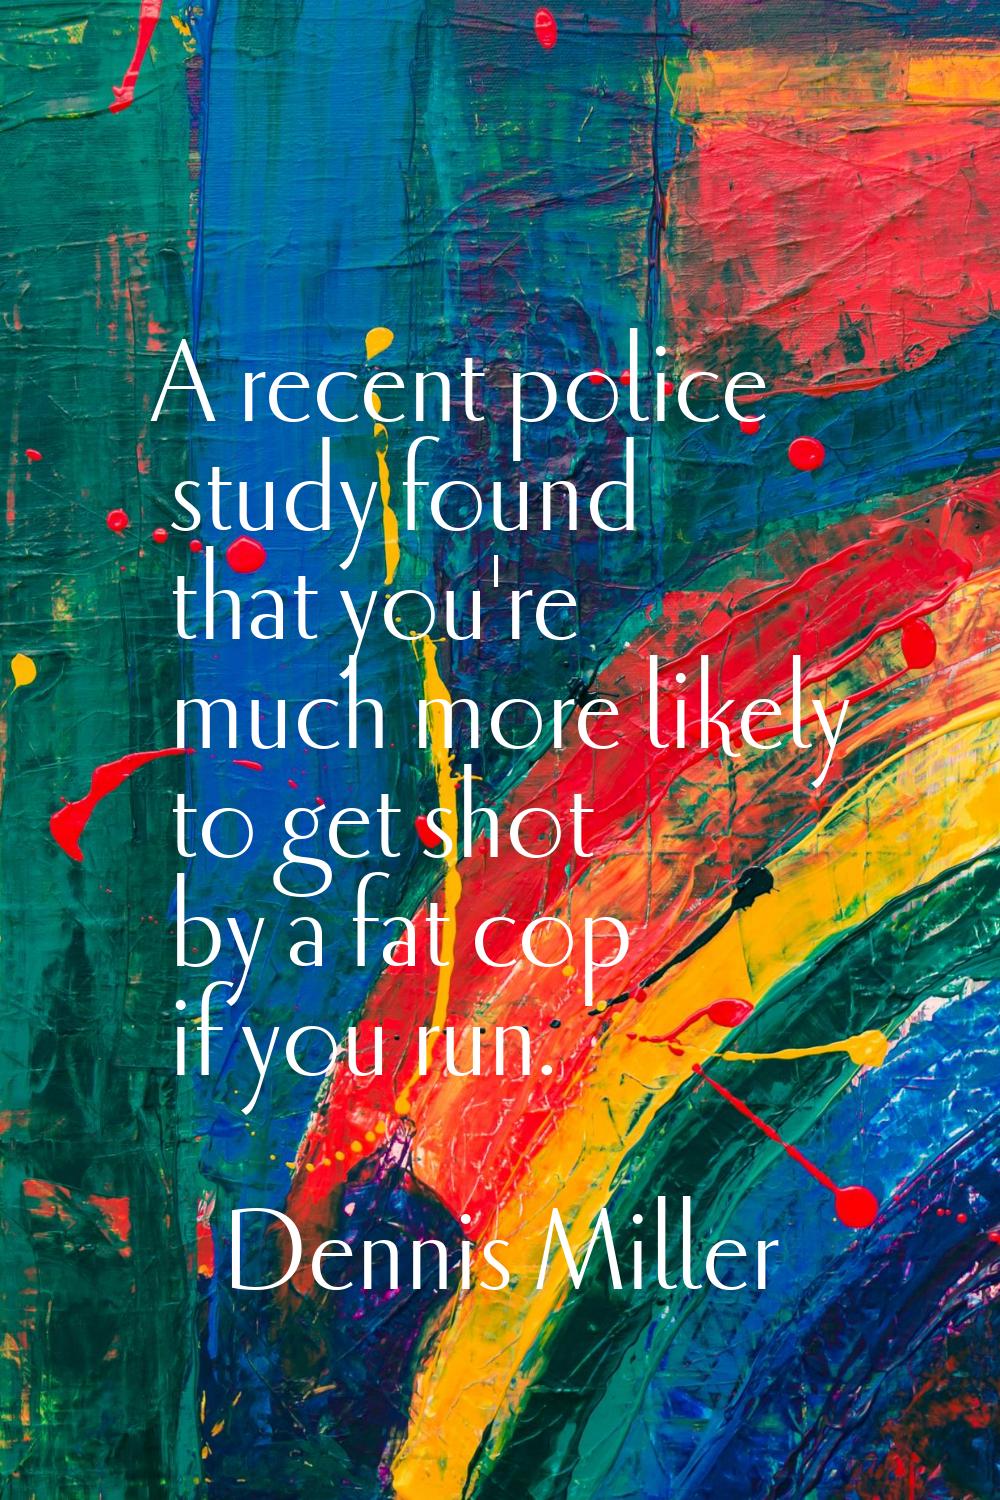 A recent police study found that you're much more likely to get shot by a fat cop if you run.